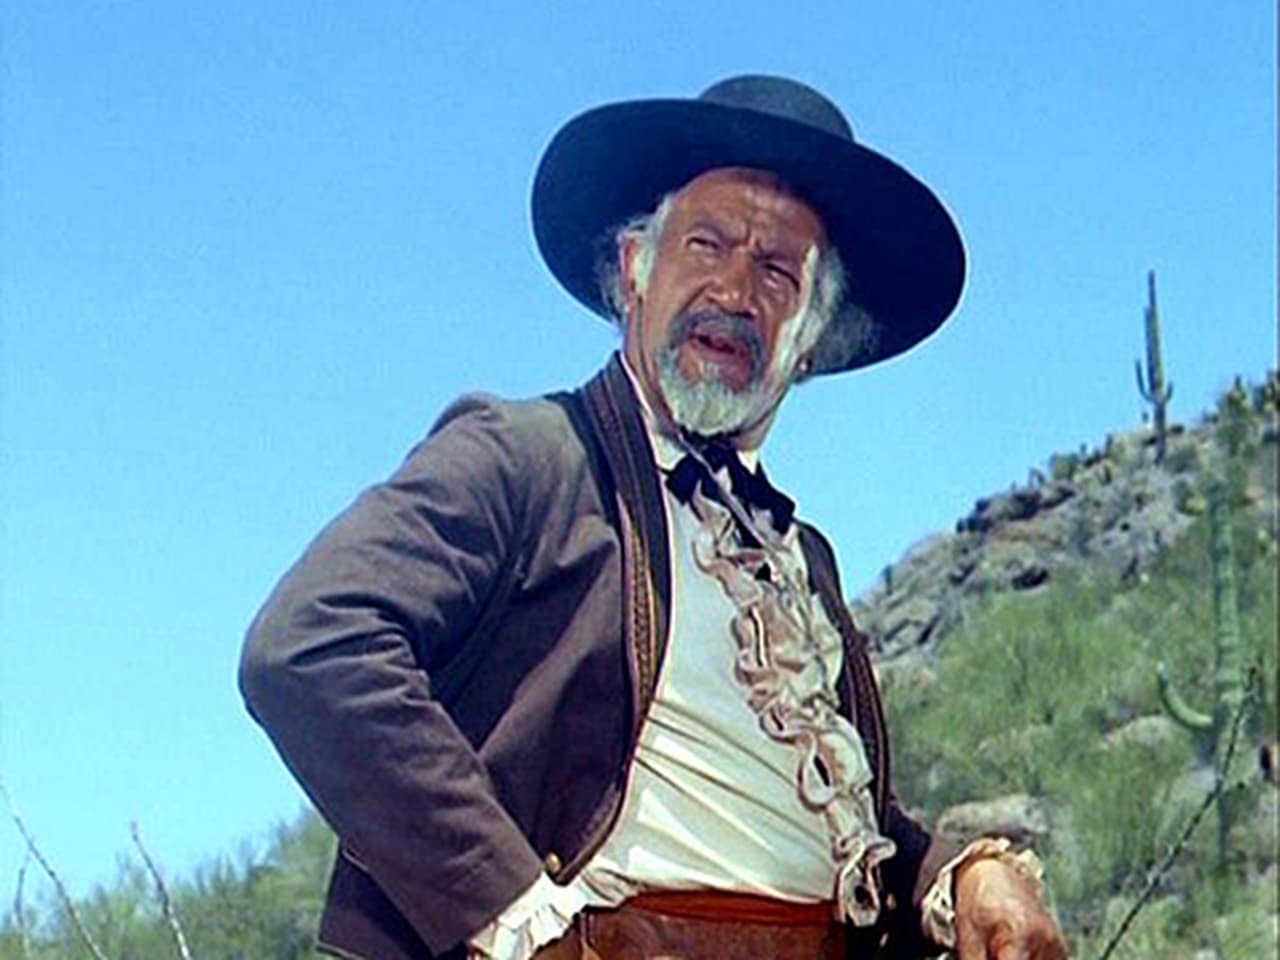 The High Chaparral - Season 4 Episode 1 : An Anger Greater Than Mine